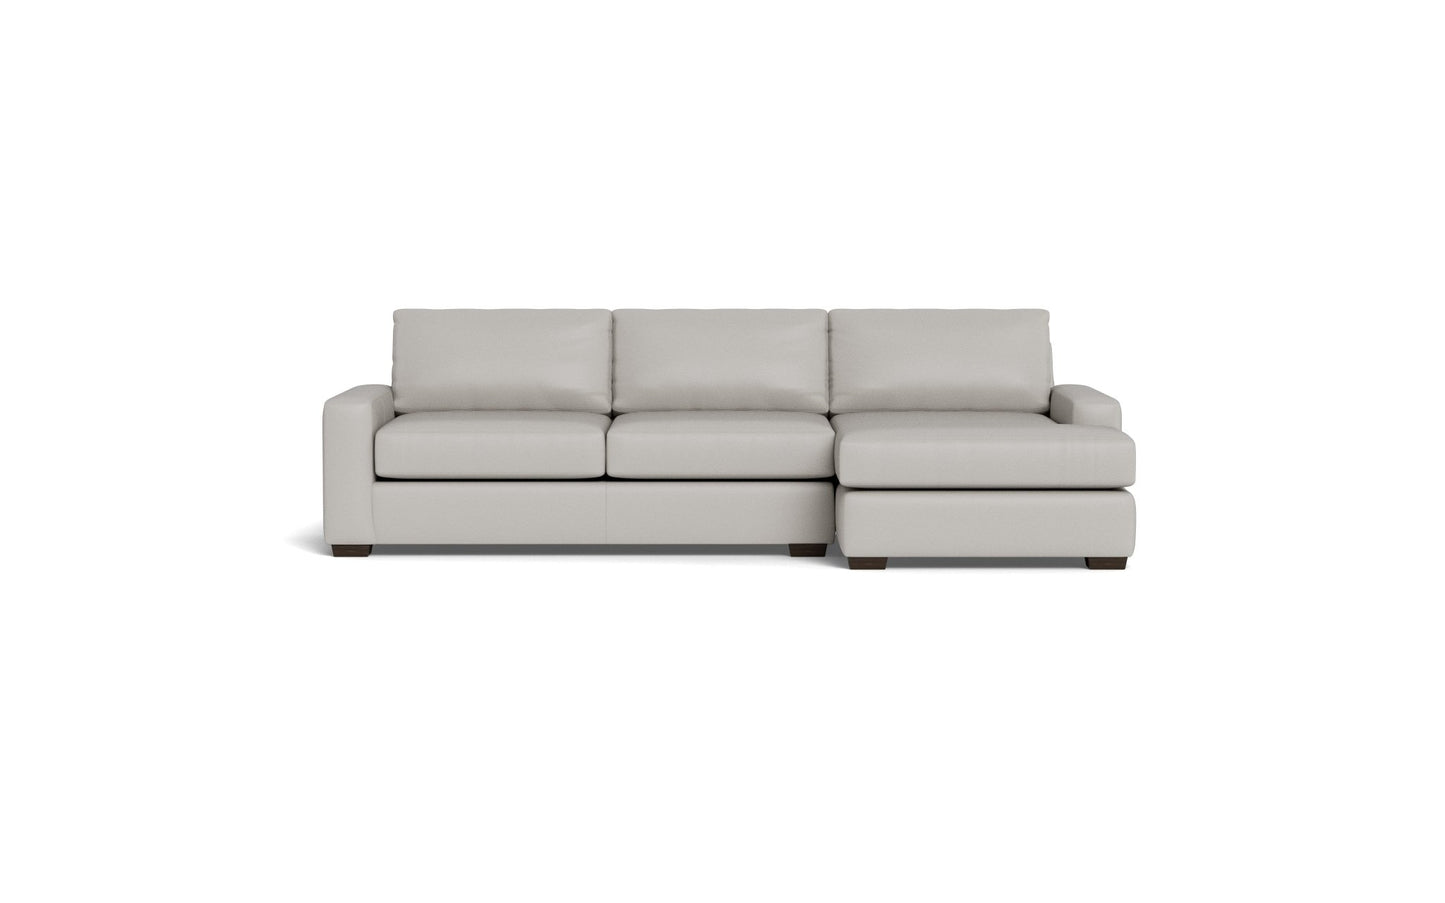 Mas Mesa Leather Right Chaise Sectional